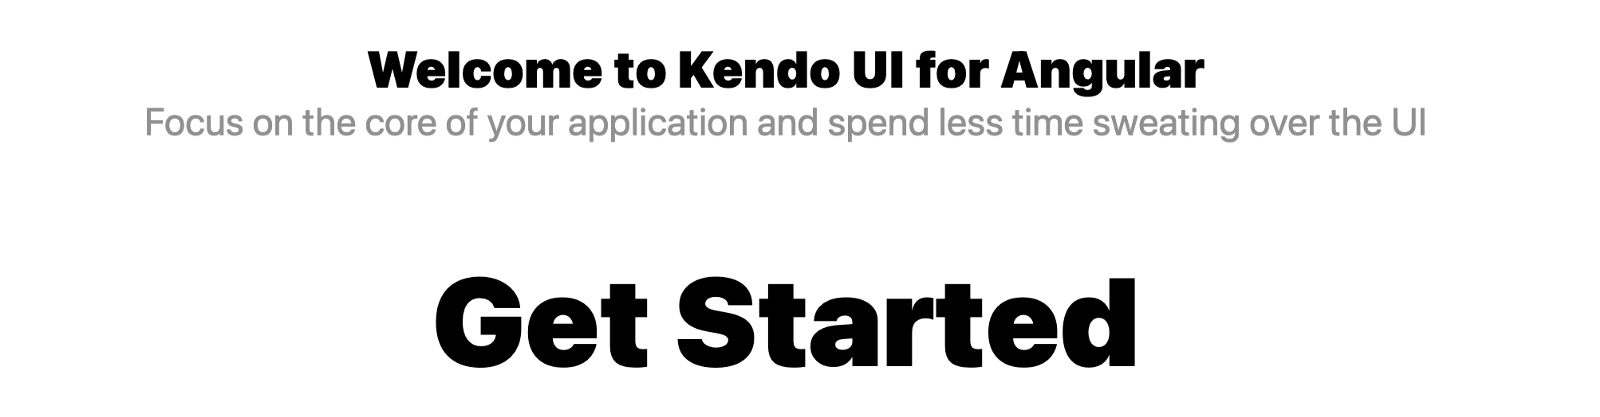 Welcome to Kendo UI for Angular. Focus on the core of your application and spend less time sweating over the UI. Get Started.